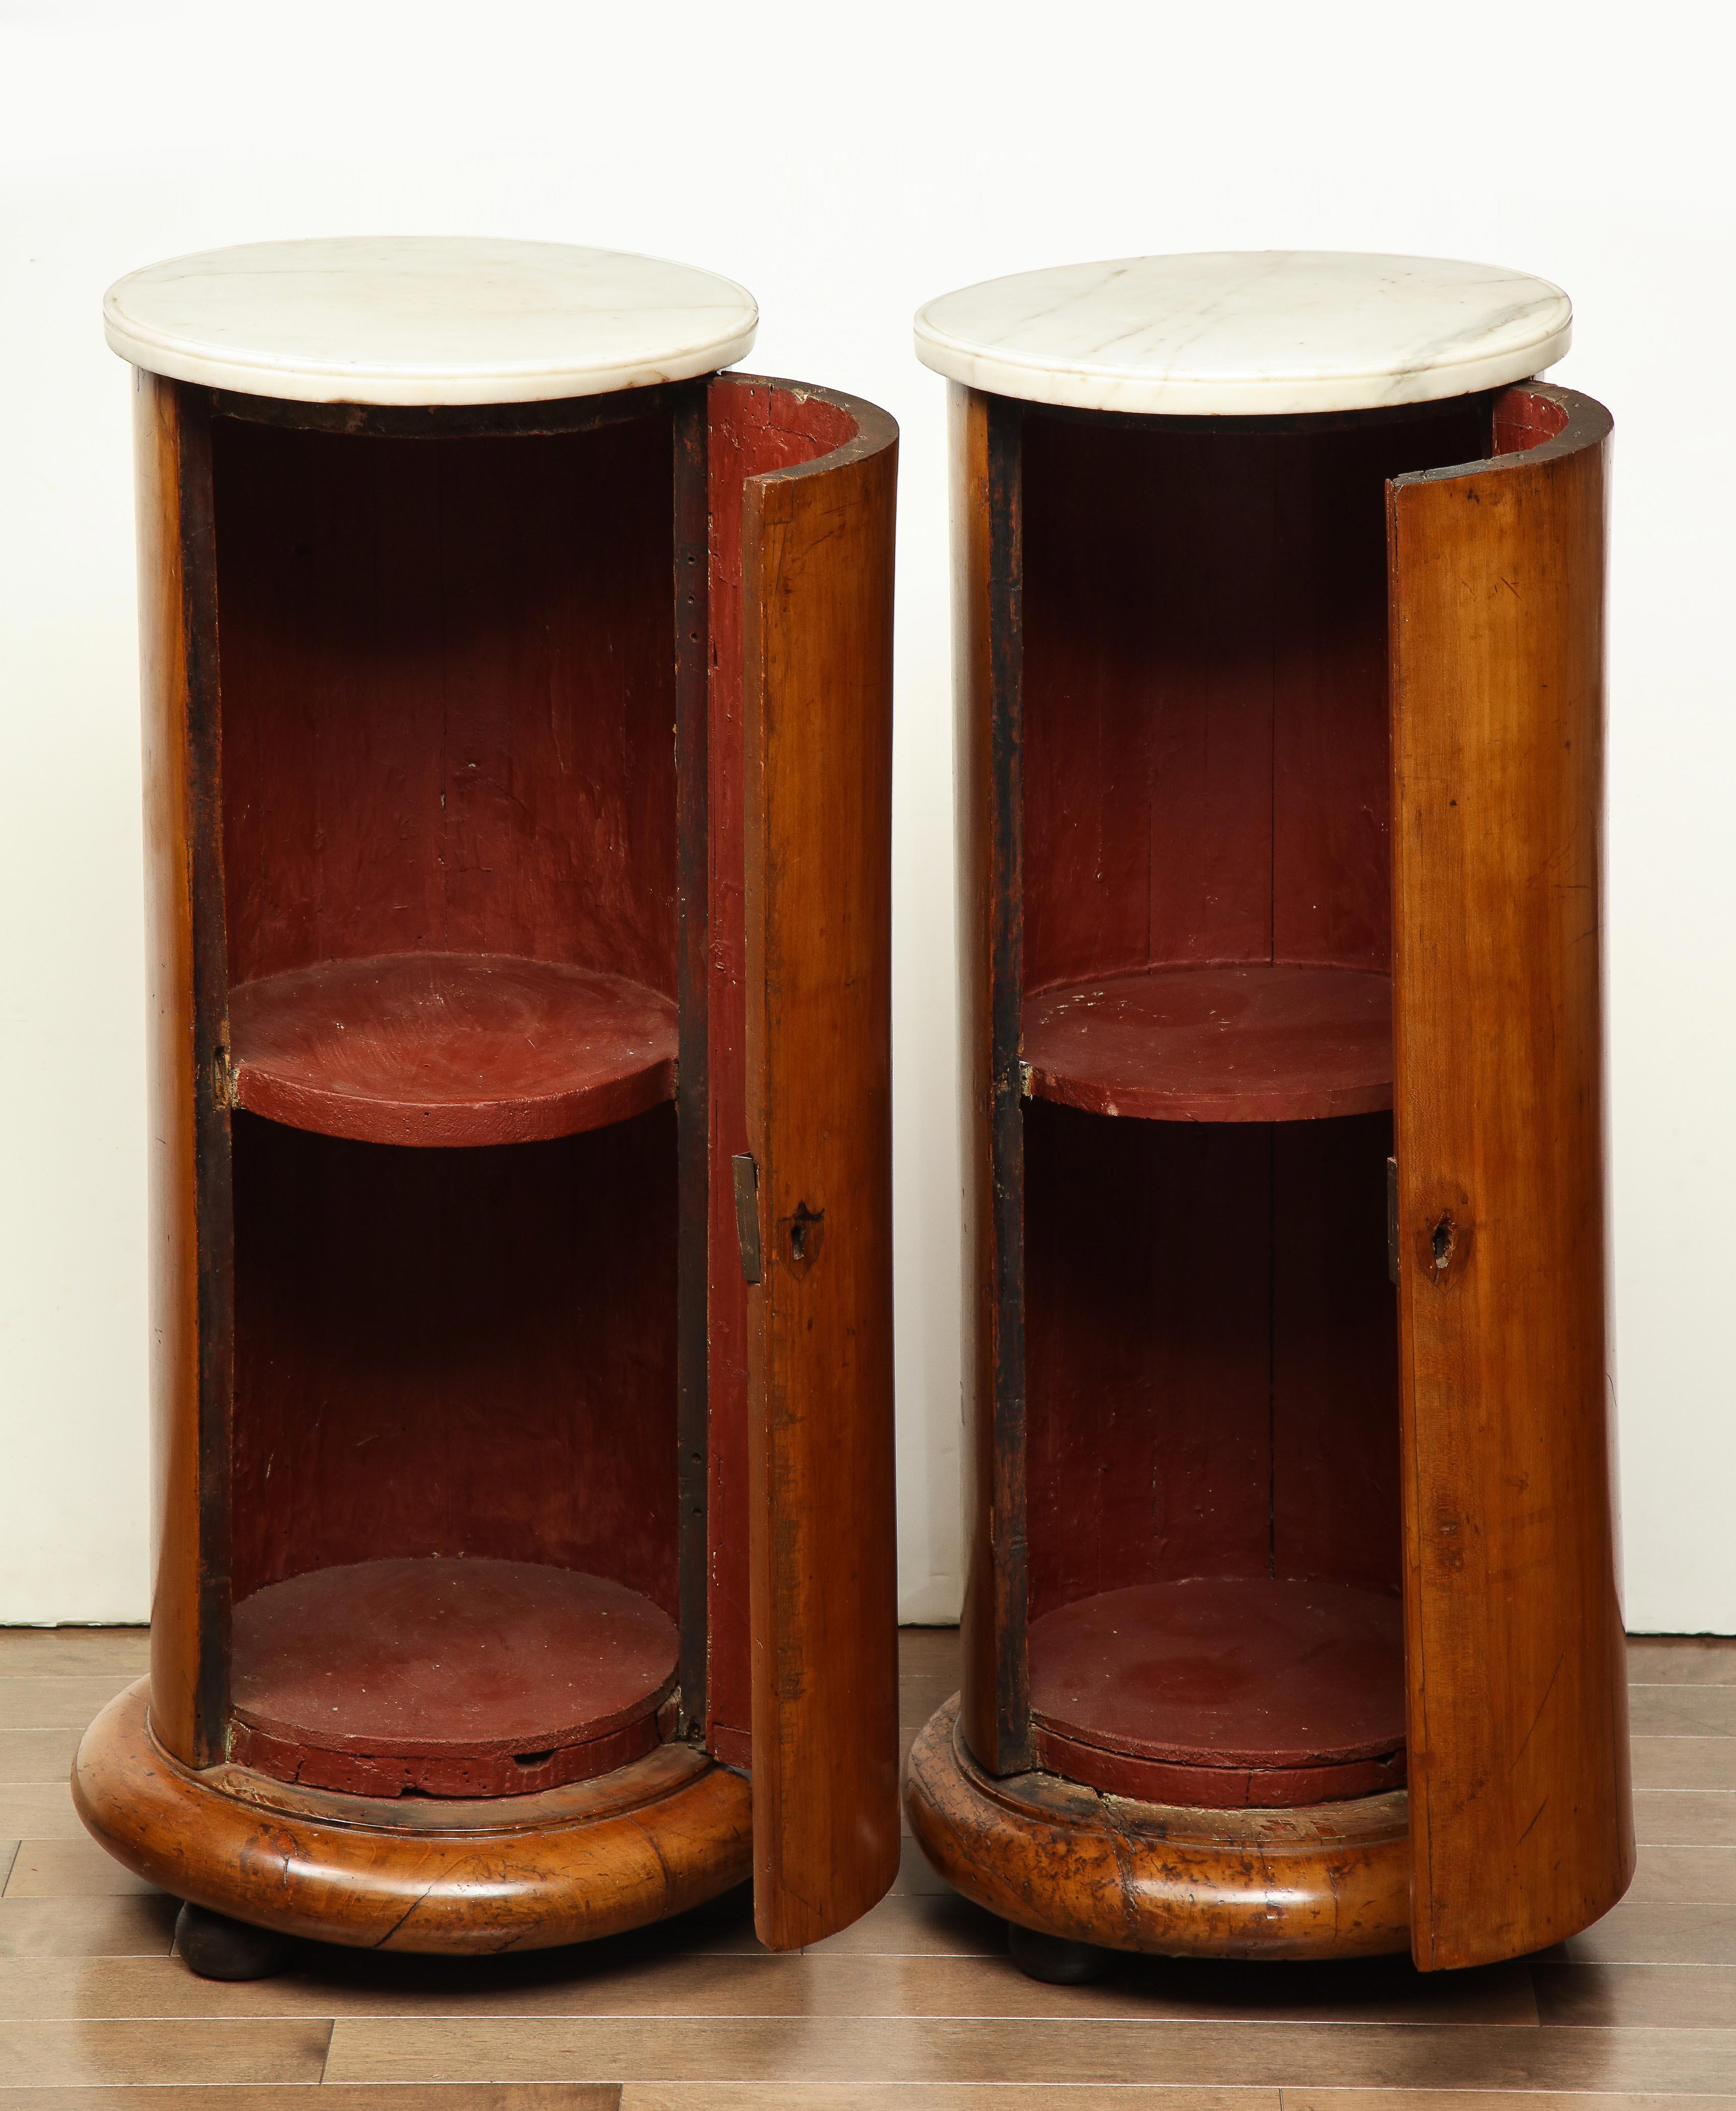 Superb Pair of Austrian Fruitwood, Marble Topped Columns, circa 1830 For Sale 1